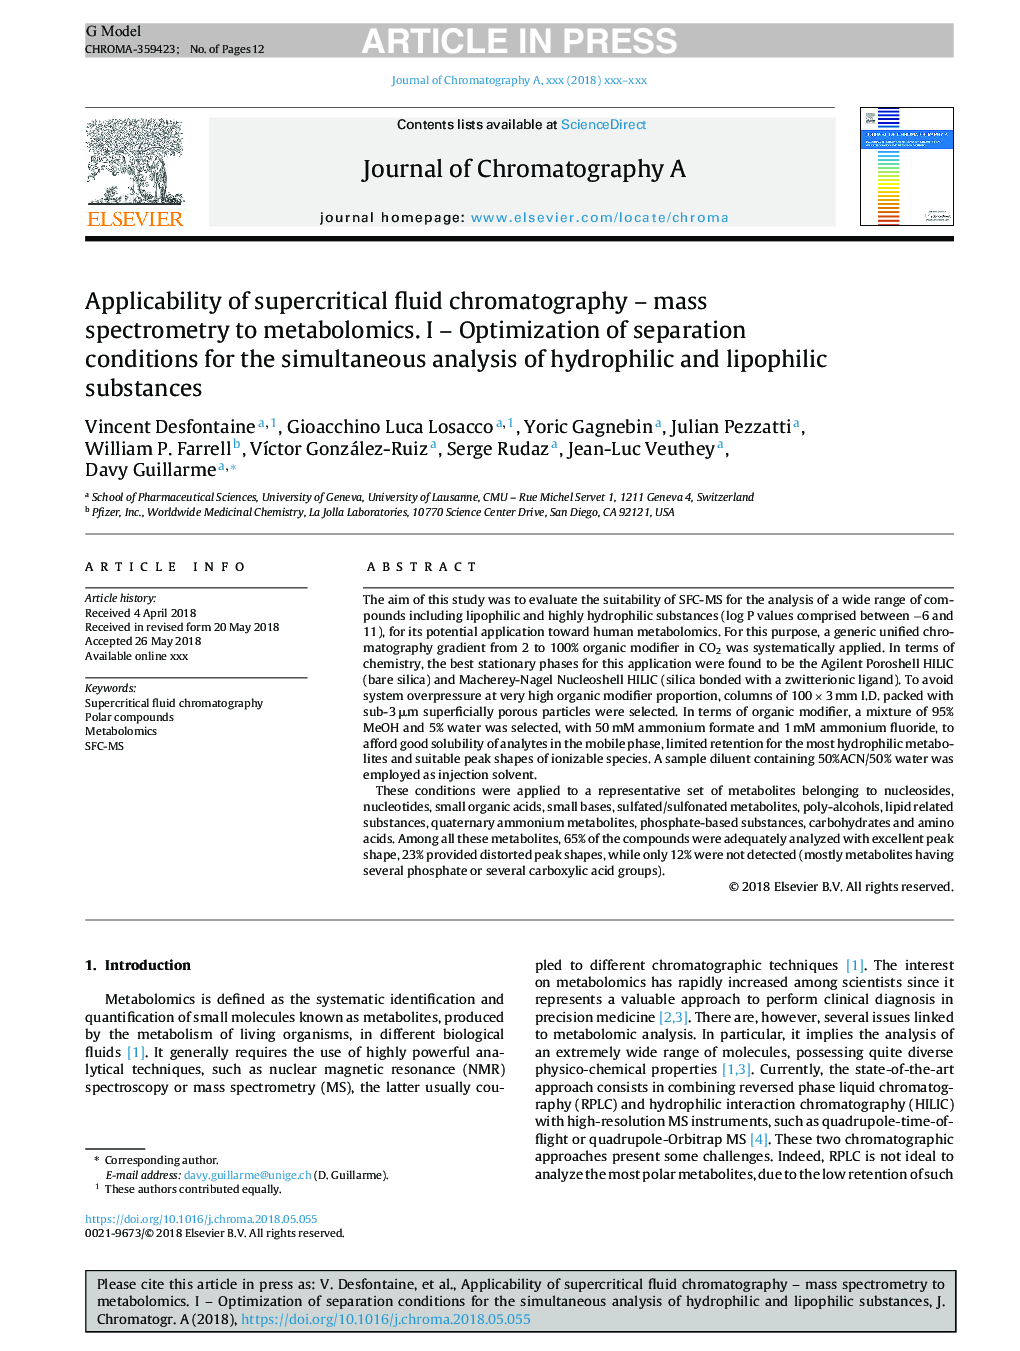 Applicability of supercritical fluid chromatography - mass spectrometry to metabolomics. I - Optimization of separation conditions for the simultaneous analysis of hydrophilic and lipophilic substances